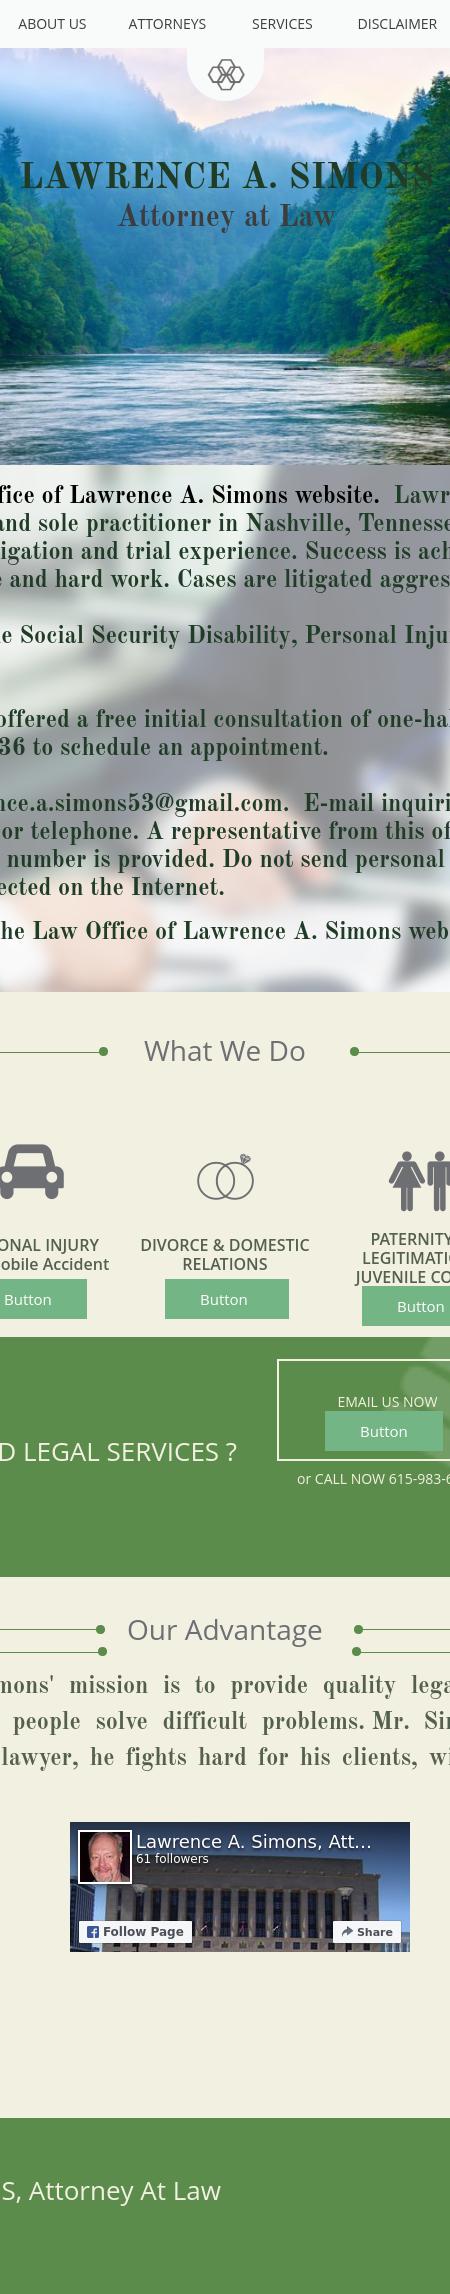 Lawrence A. Simons, Attorney at Law - Nashville TN Lawyers